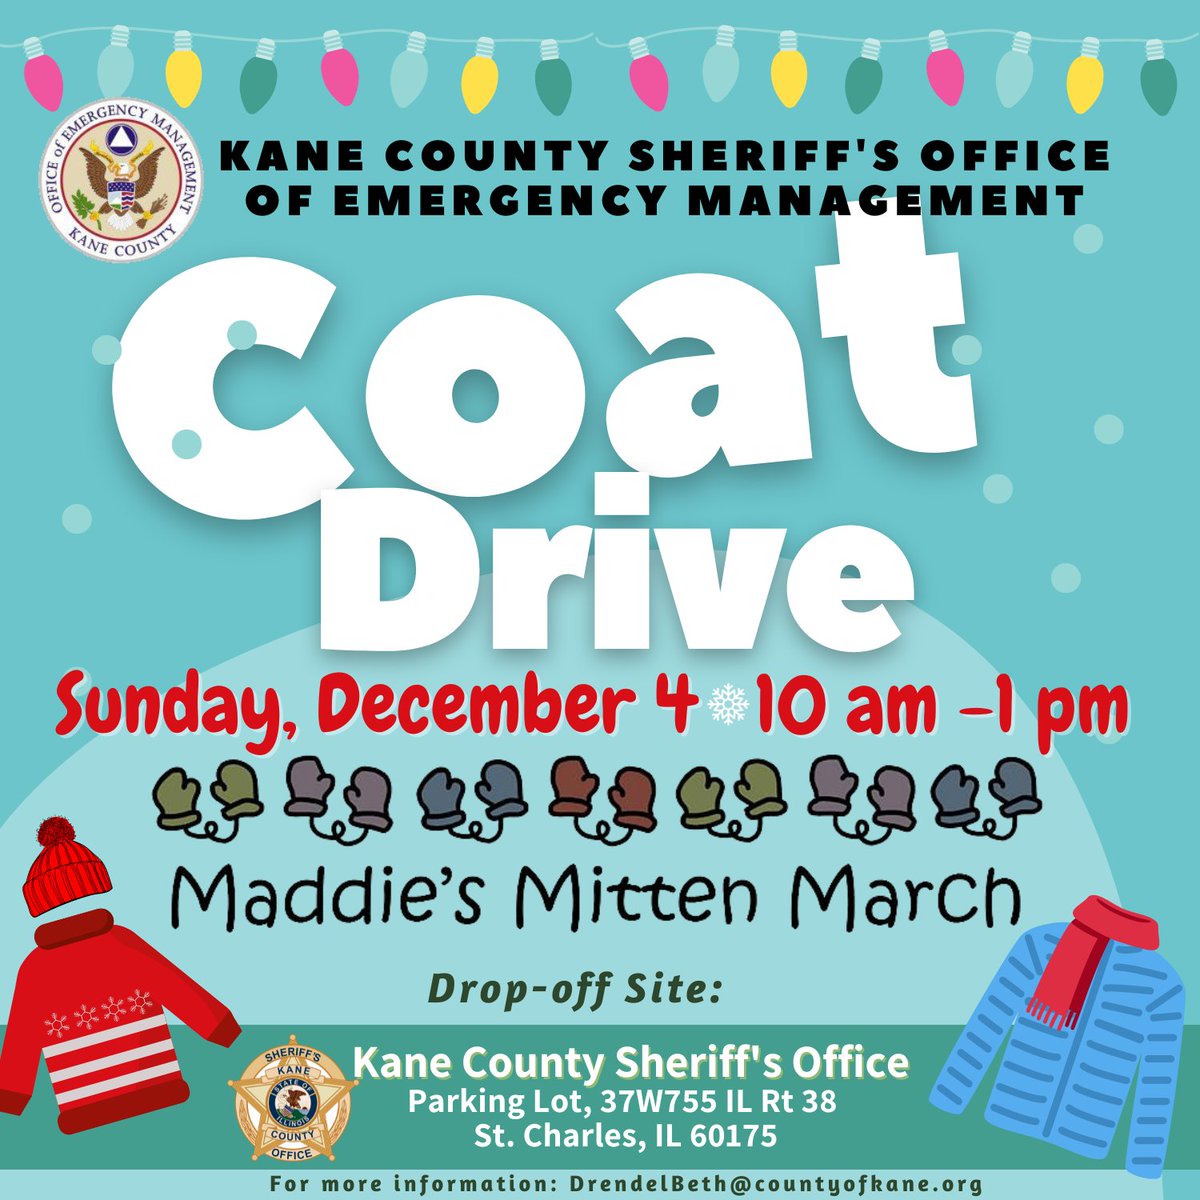 Do you have any new or gently used coats, hats, scarves, boots, or snow pants? Bring them Sunday, December 4, to the KCSO parking lot! For more information on Maddie's mission: mittenmobile.com #saferfromthestart #kanesheriff